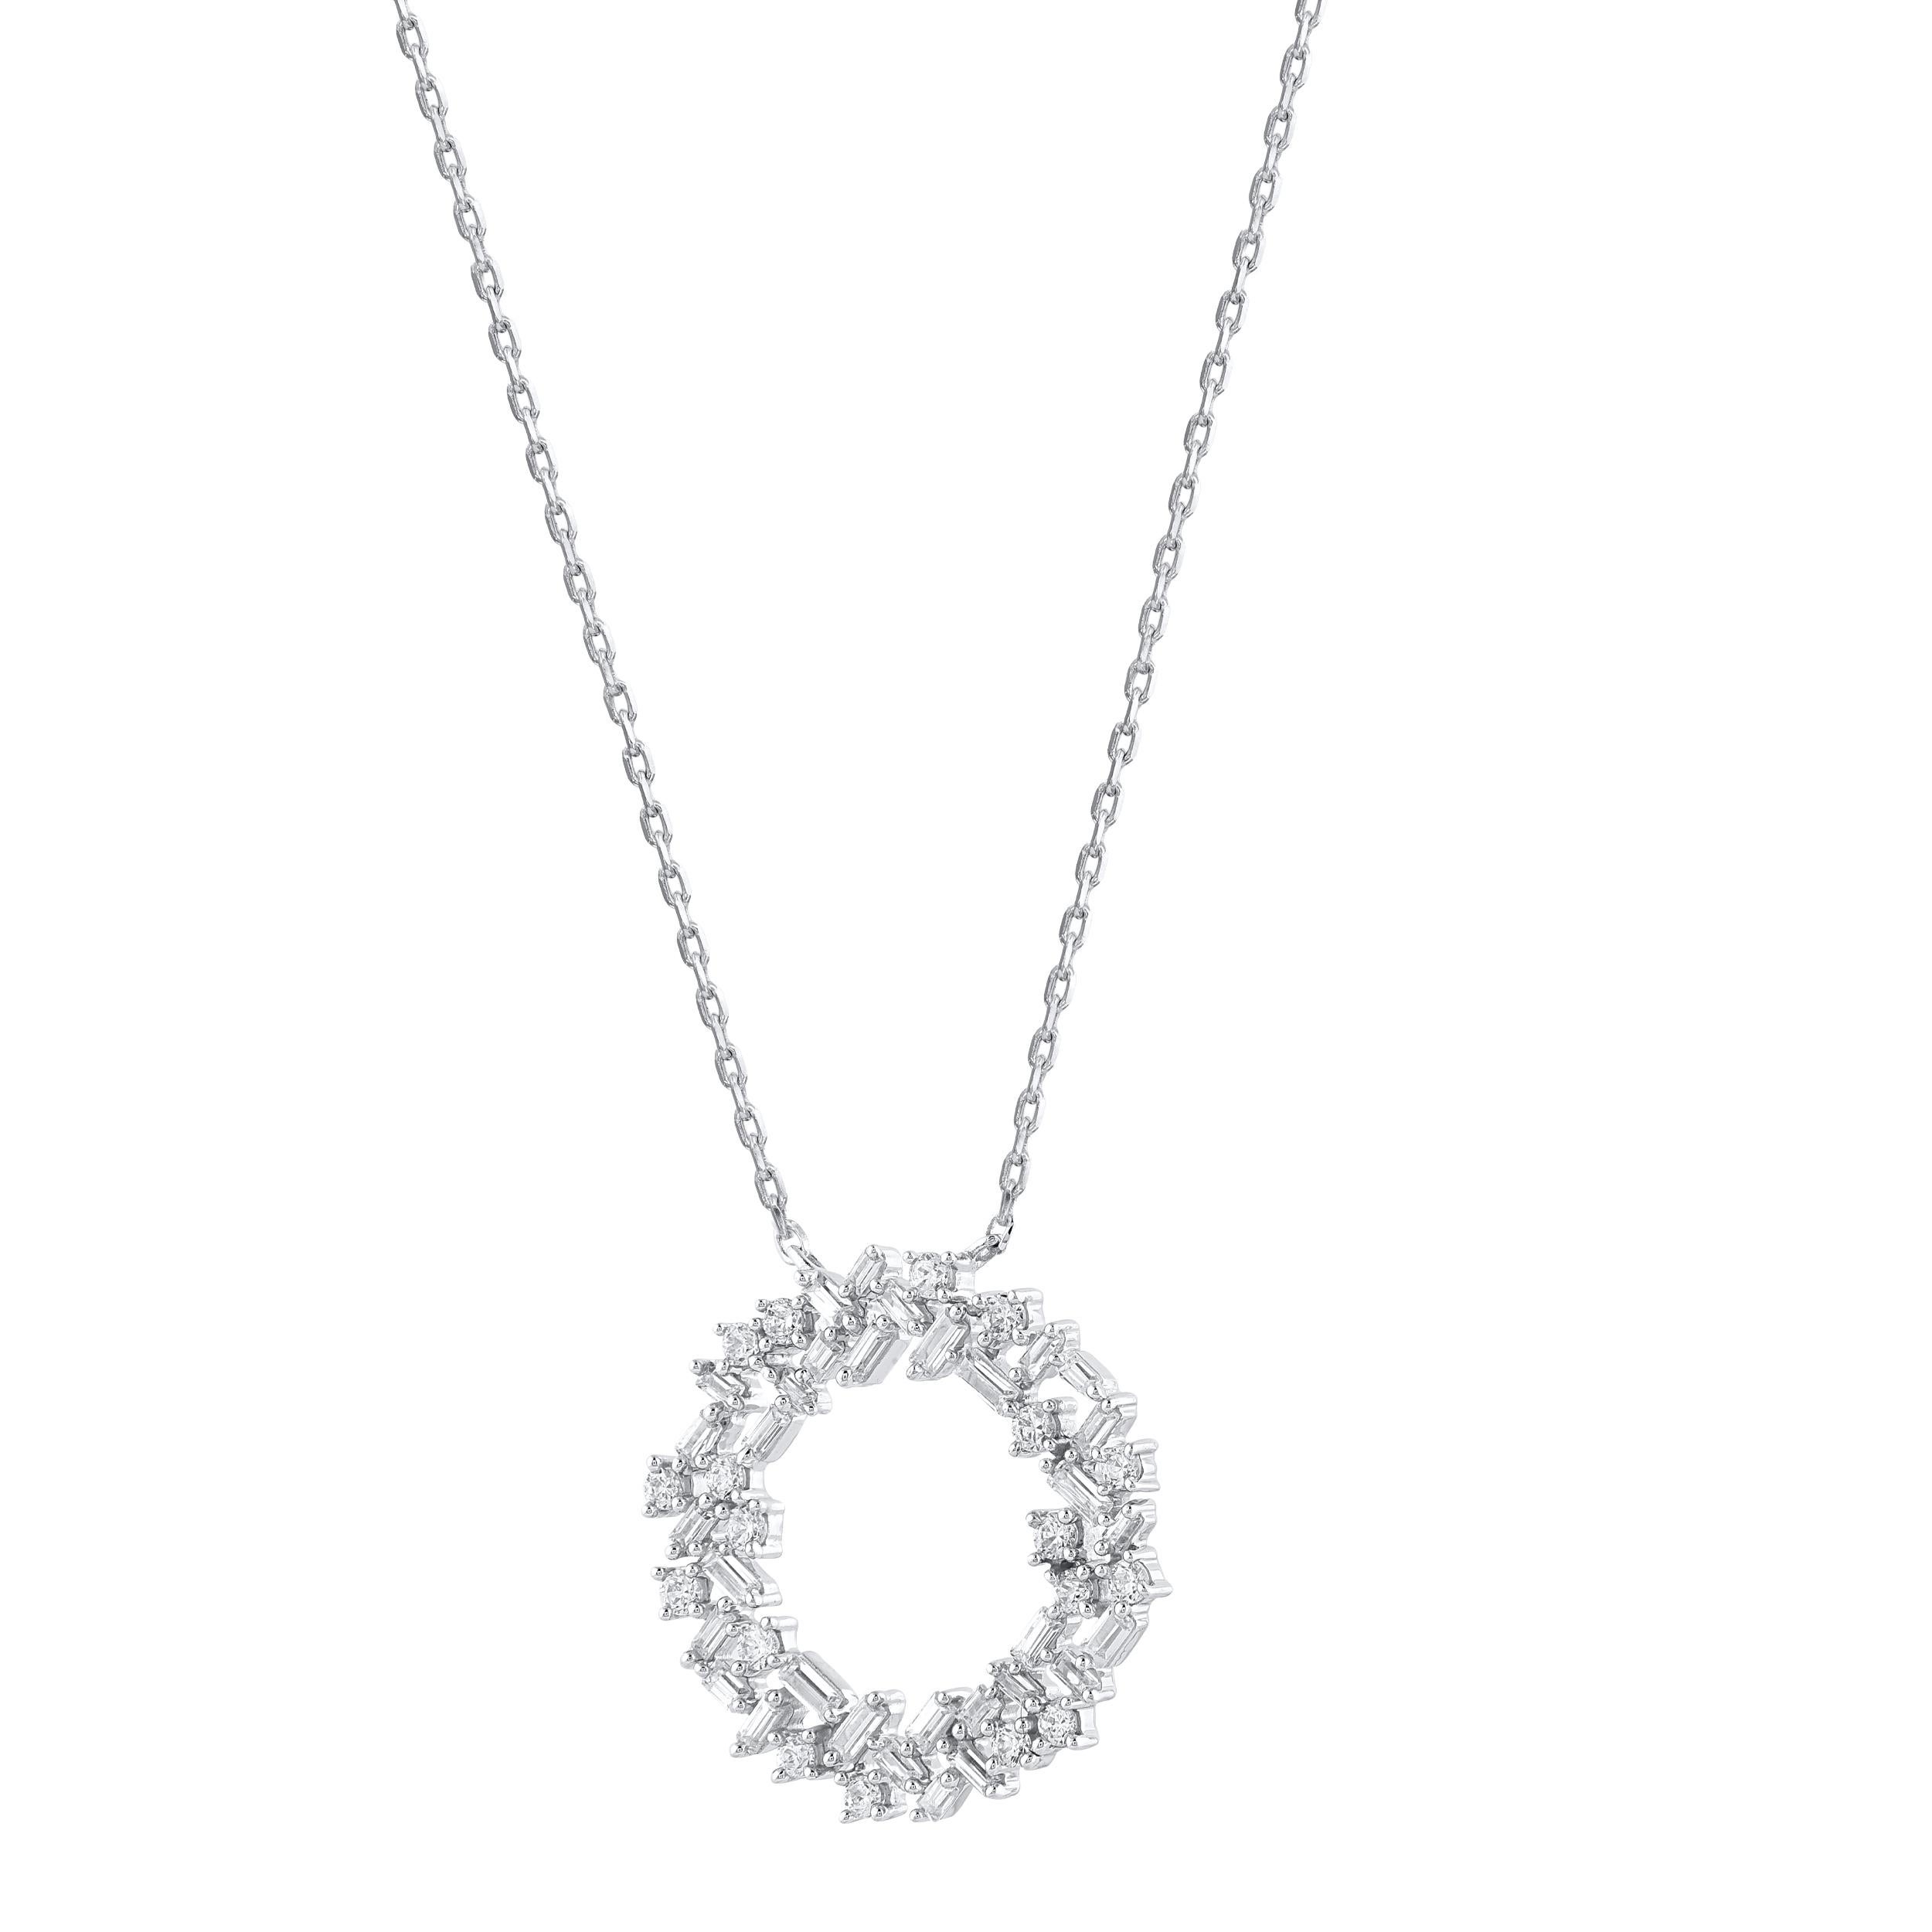 These beautiful eternity pendant is studded with 50 brilliant cut and baguette cut natural diamonds in prong setting. The total diamond weight of these diamond pendant is 0.50 carats. All the diamonds are H-I color, I-2 clarity. This white gold